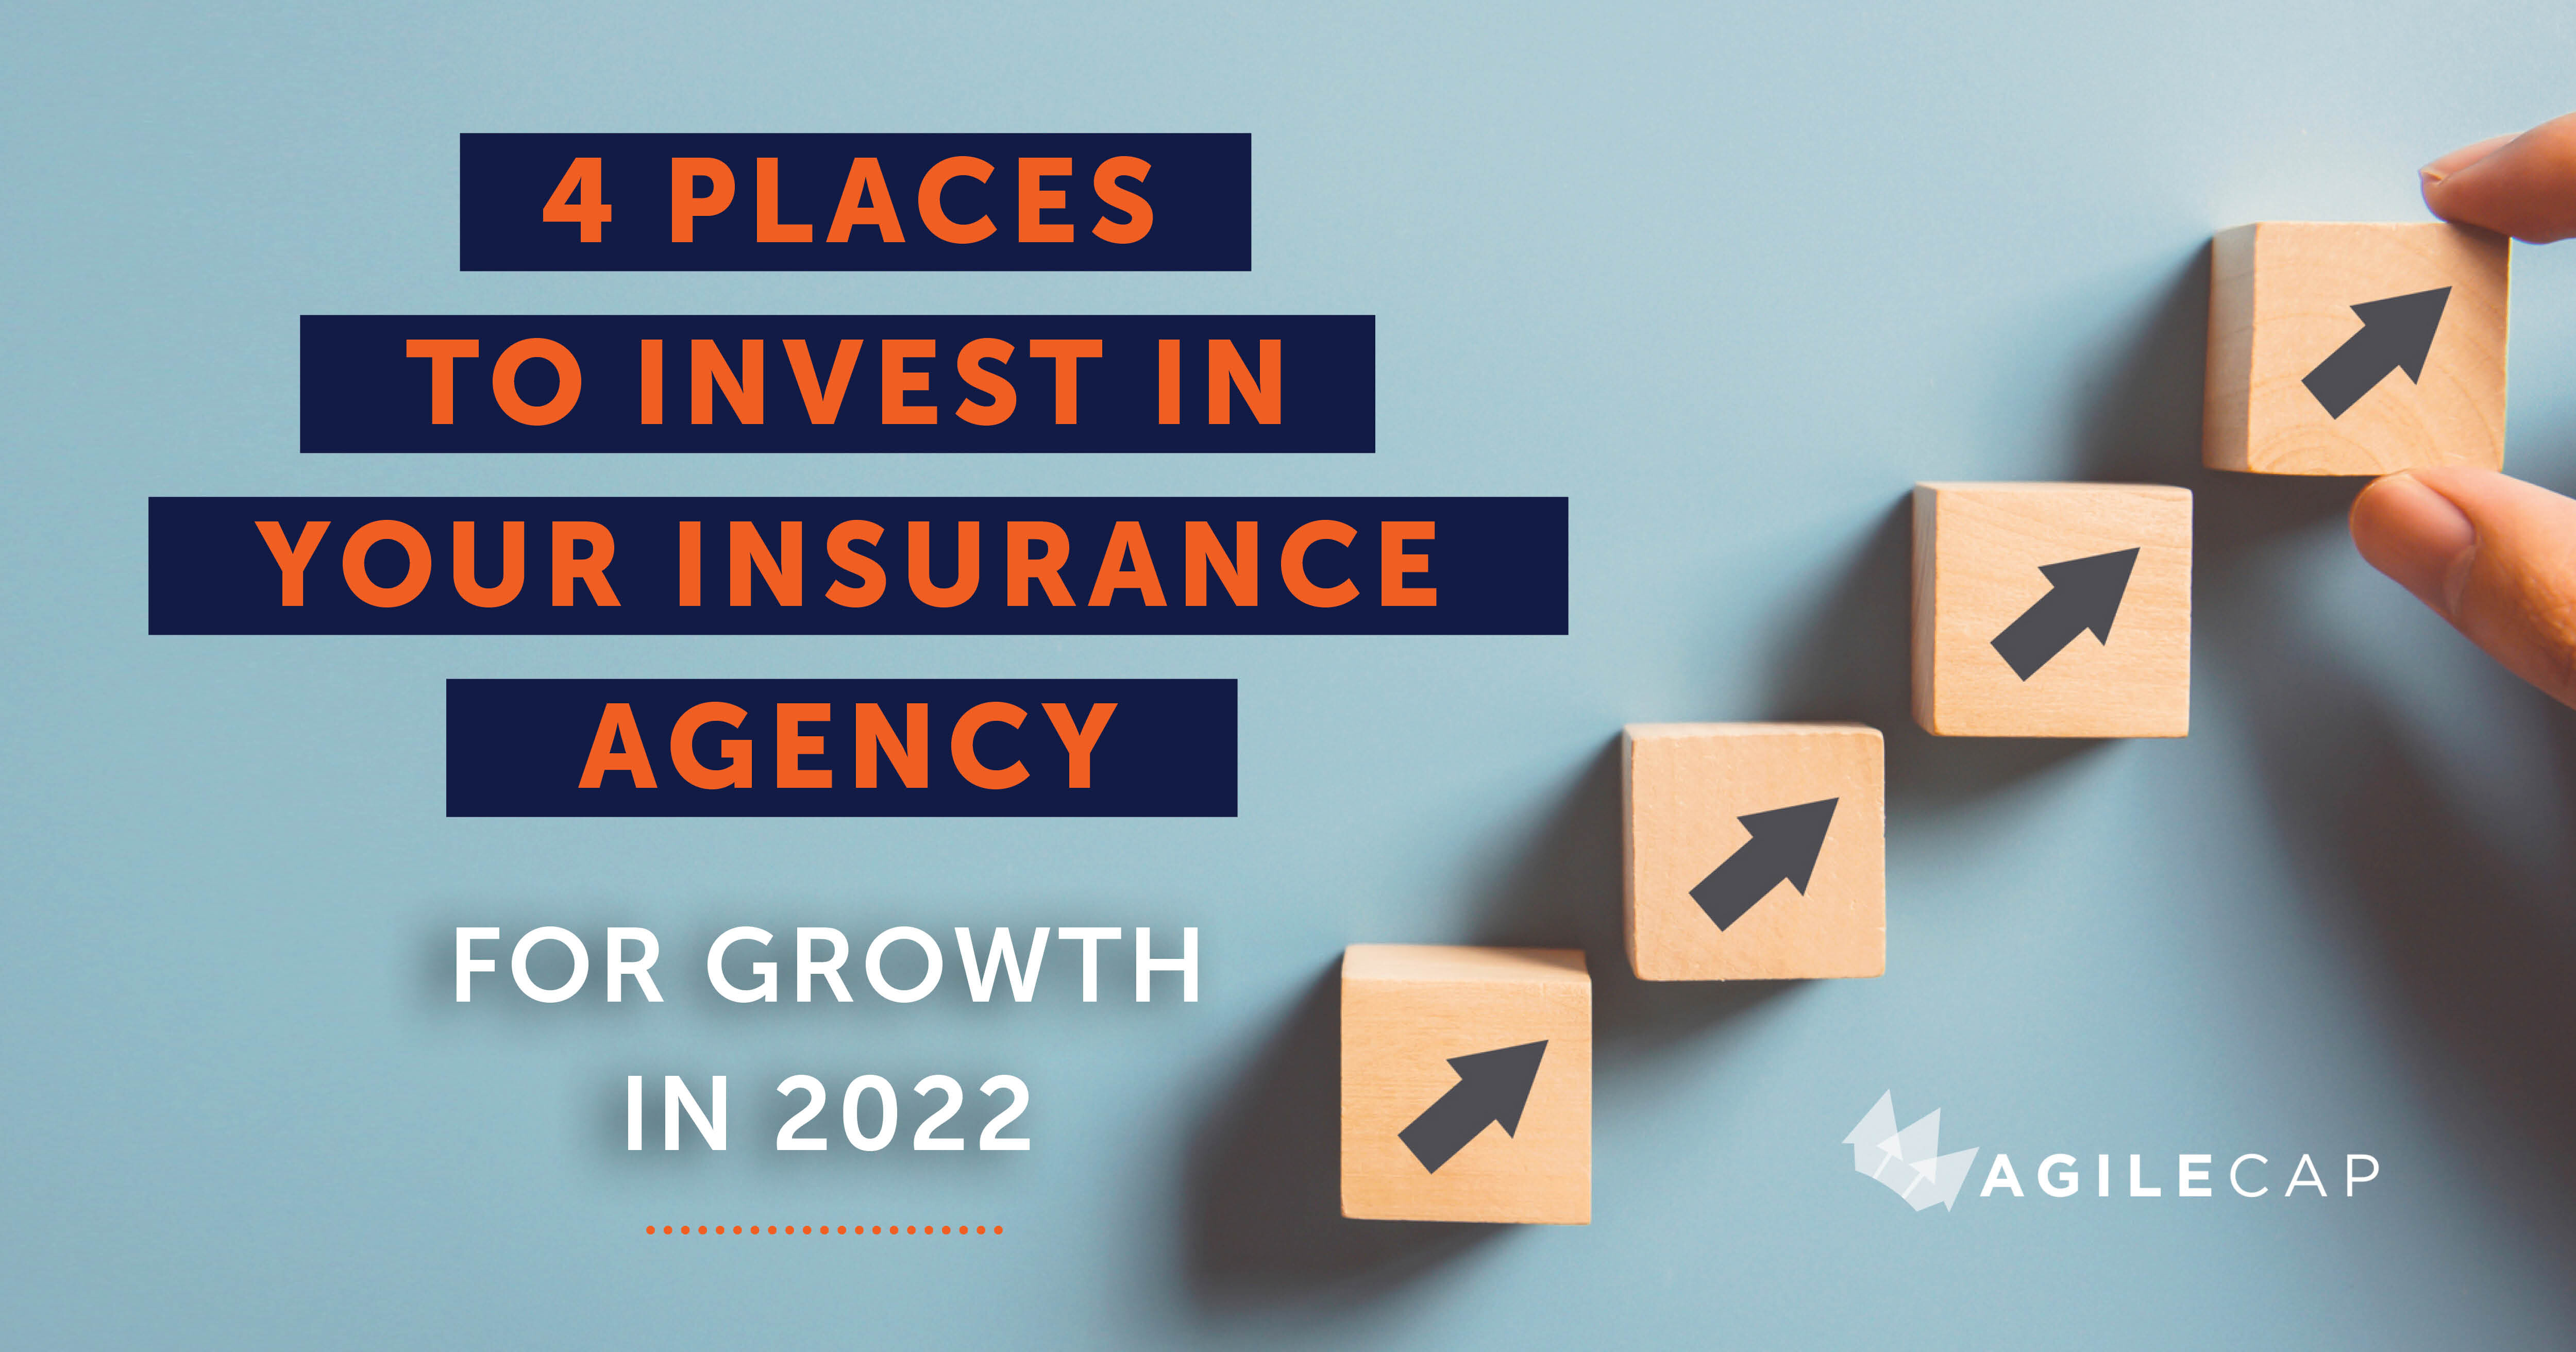 4 Places to Invest in Your Insurance Agency for Growth in 2022